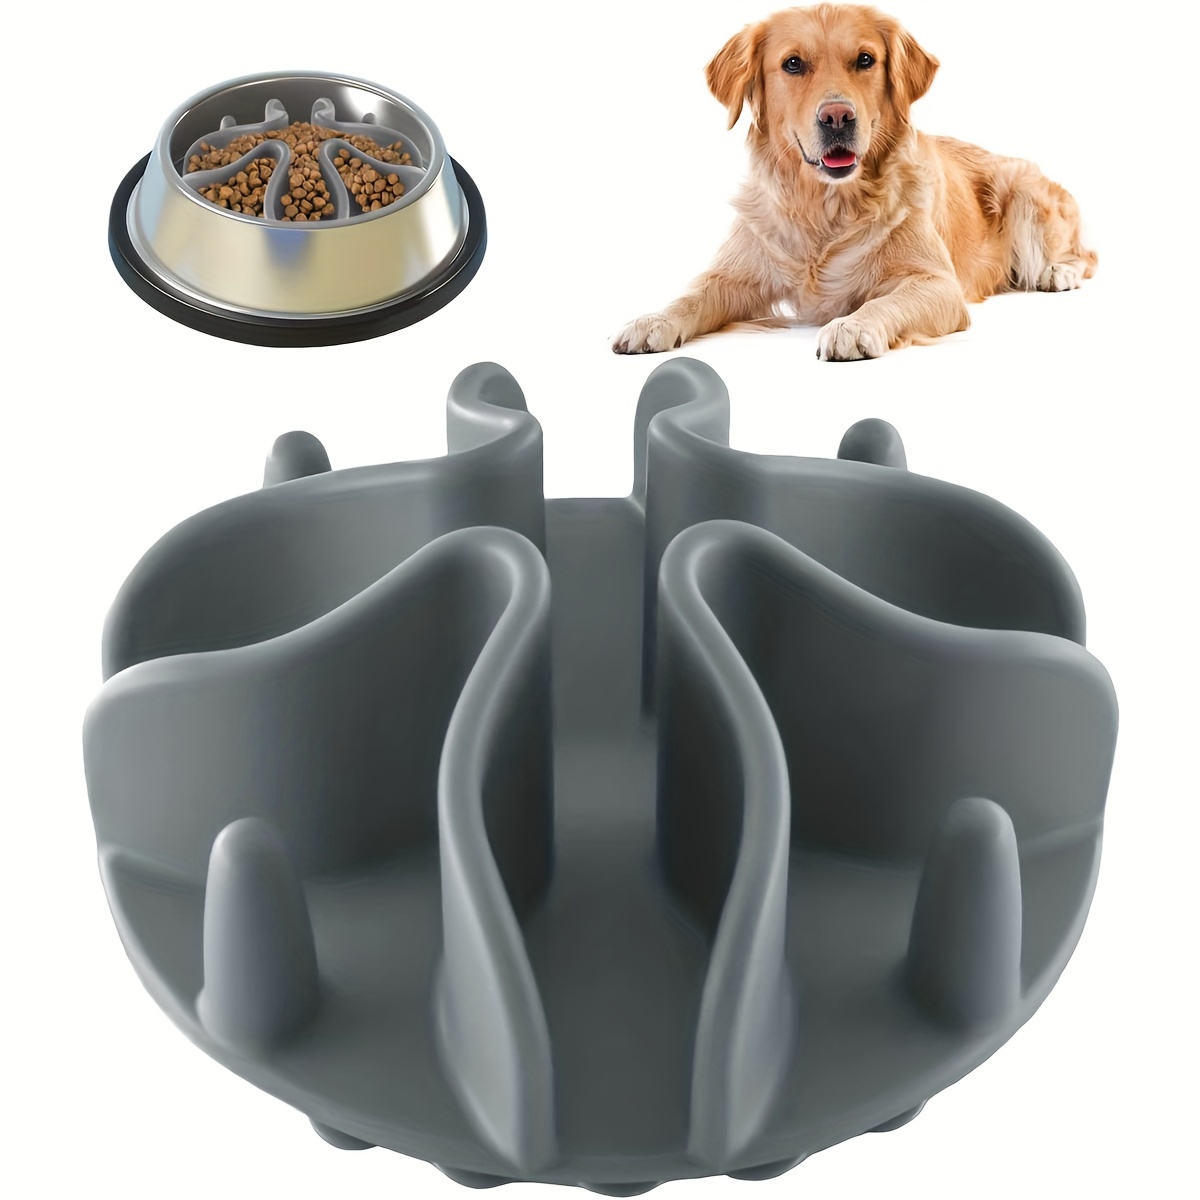 Bright Dezigns Elevated Dog Bowls - for Large Dogs. Raised Dog Bowl for  Medium Dogs with 2 Stainless Steel Pet Food and Water Bowls. Mango Wood Top  on